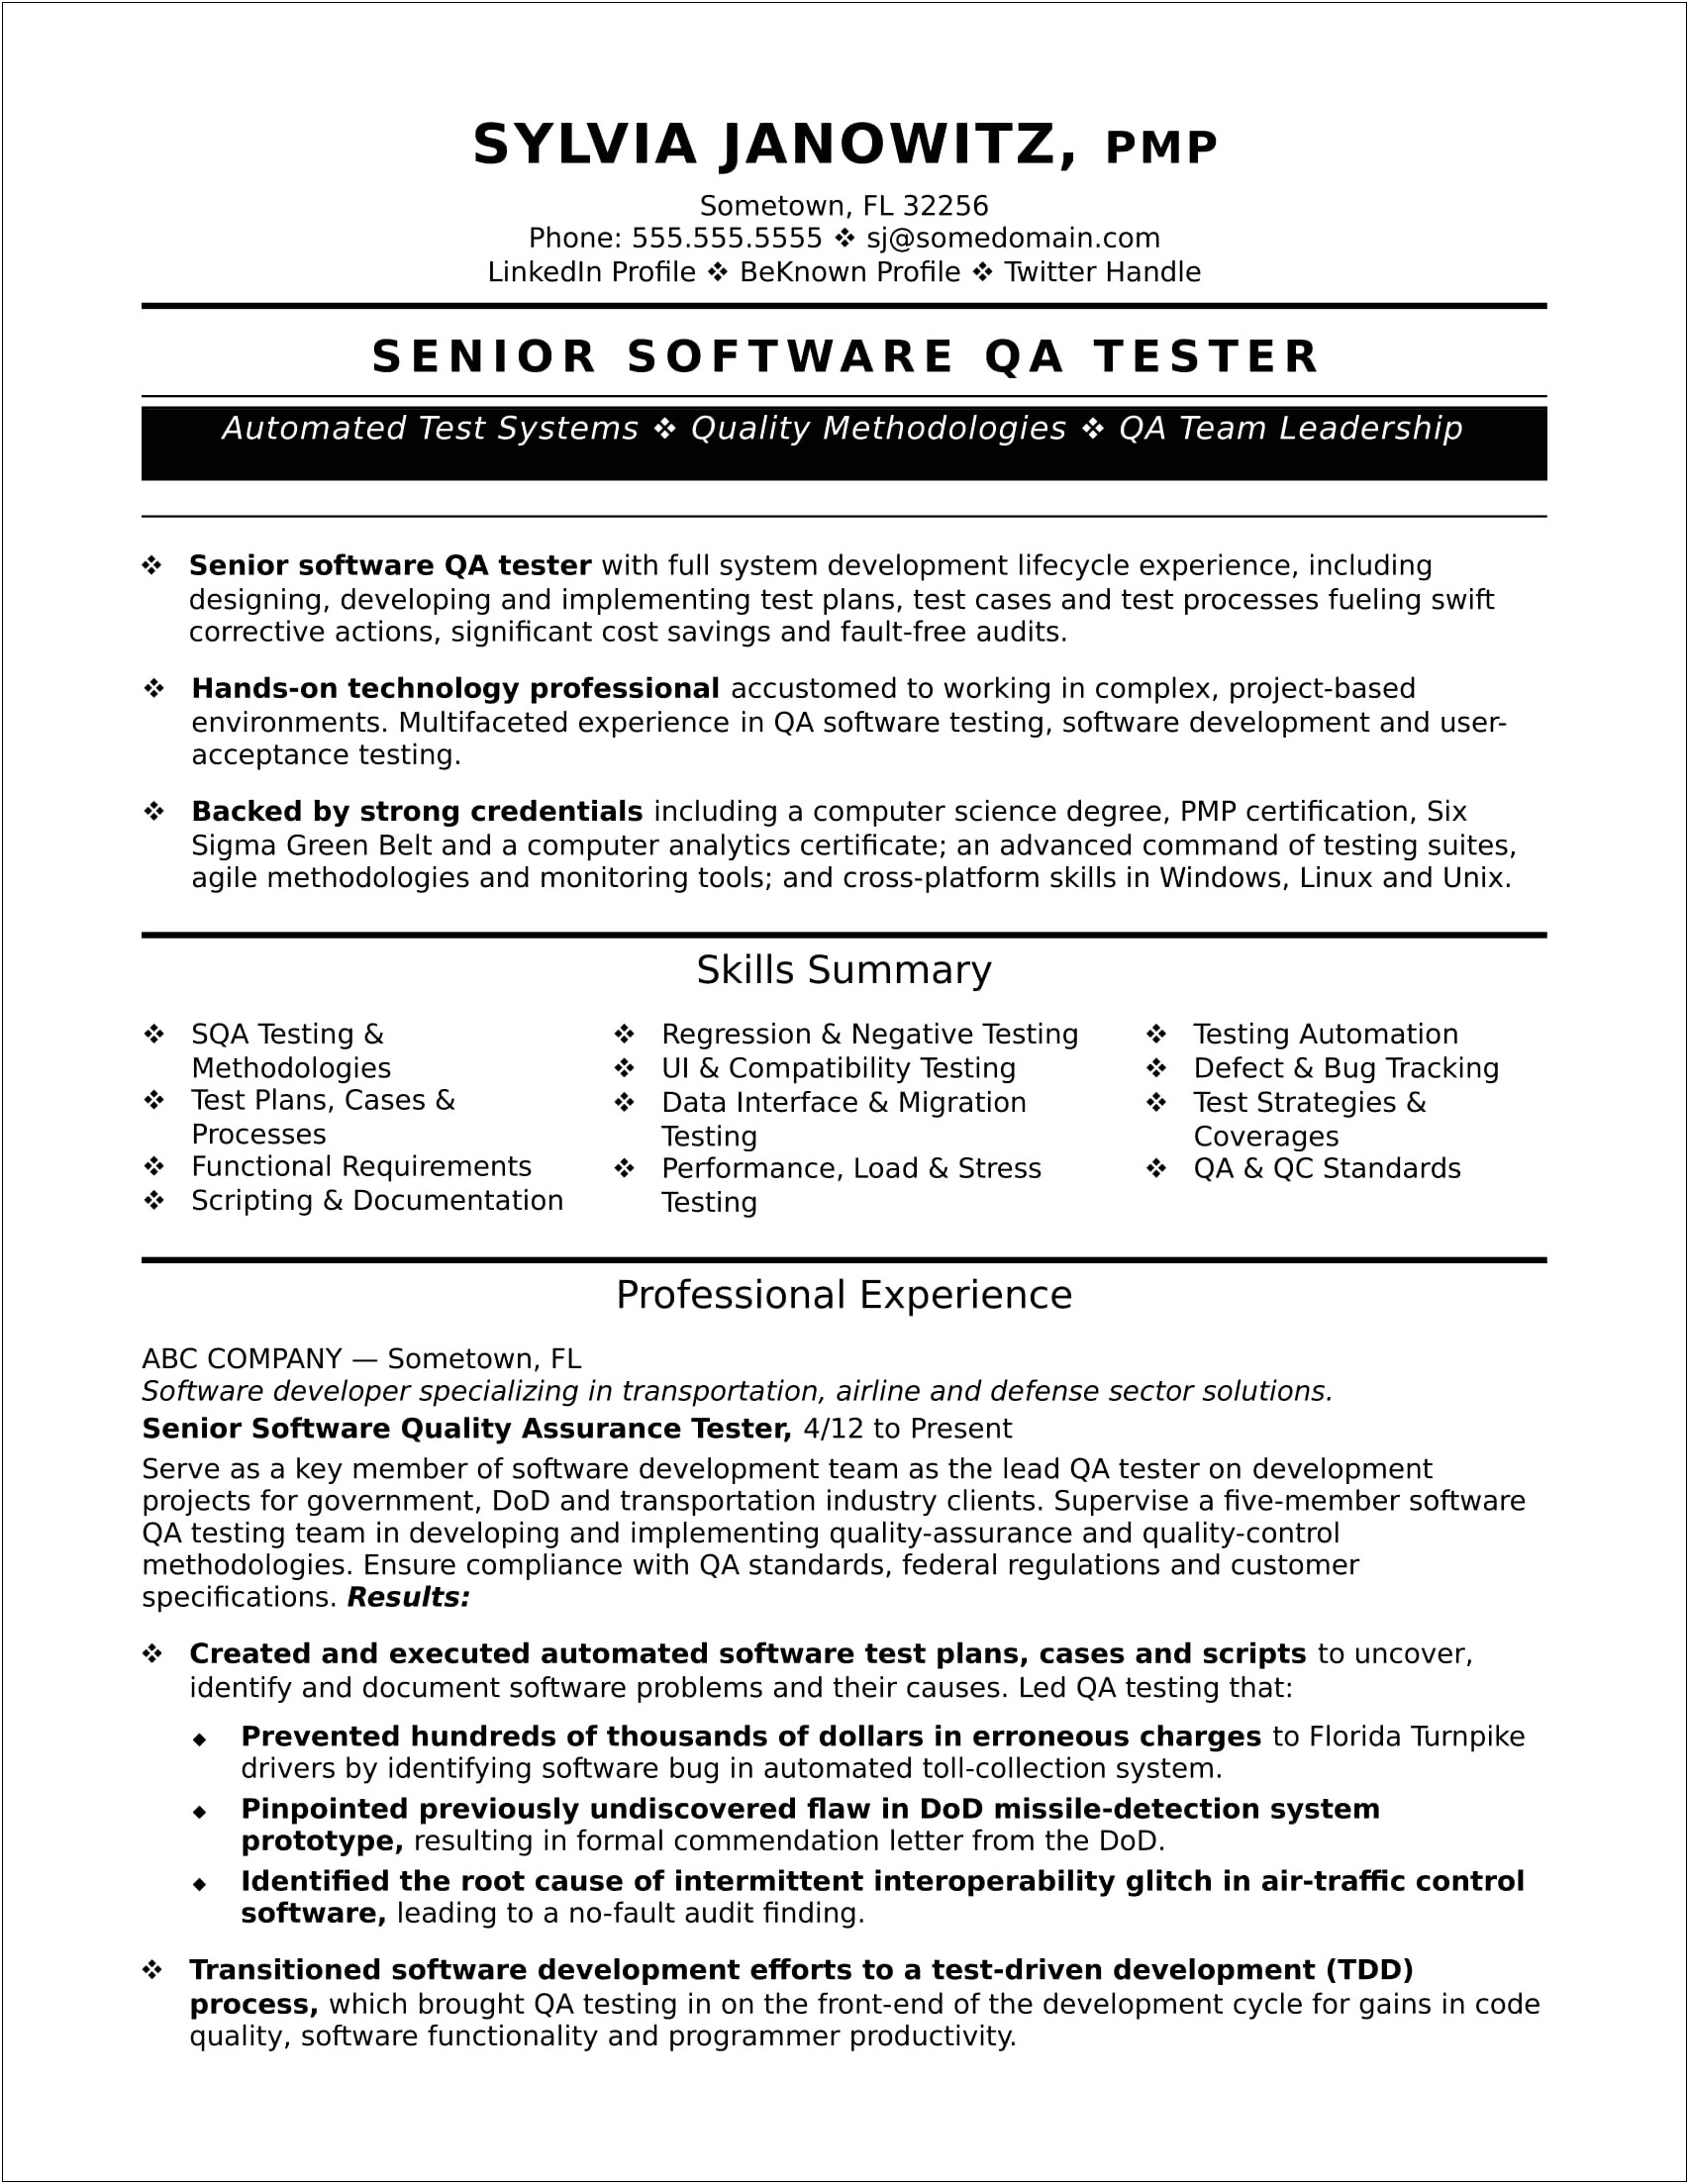 Selenium Tester Resume For 1 Year Experience